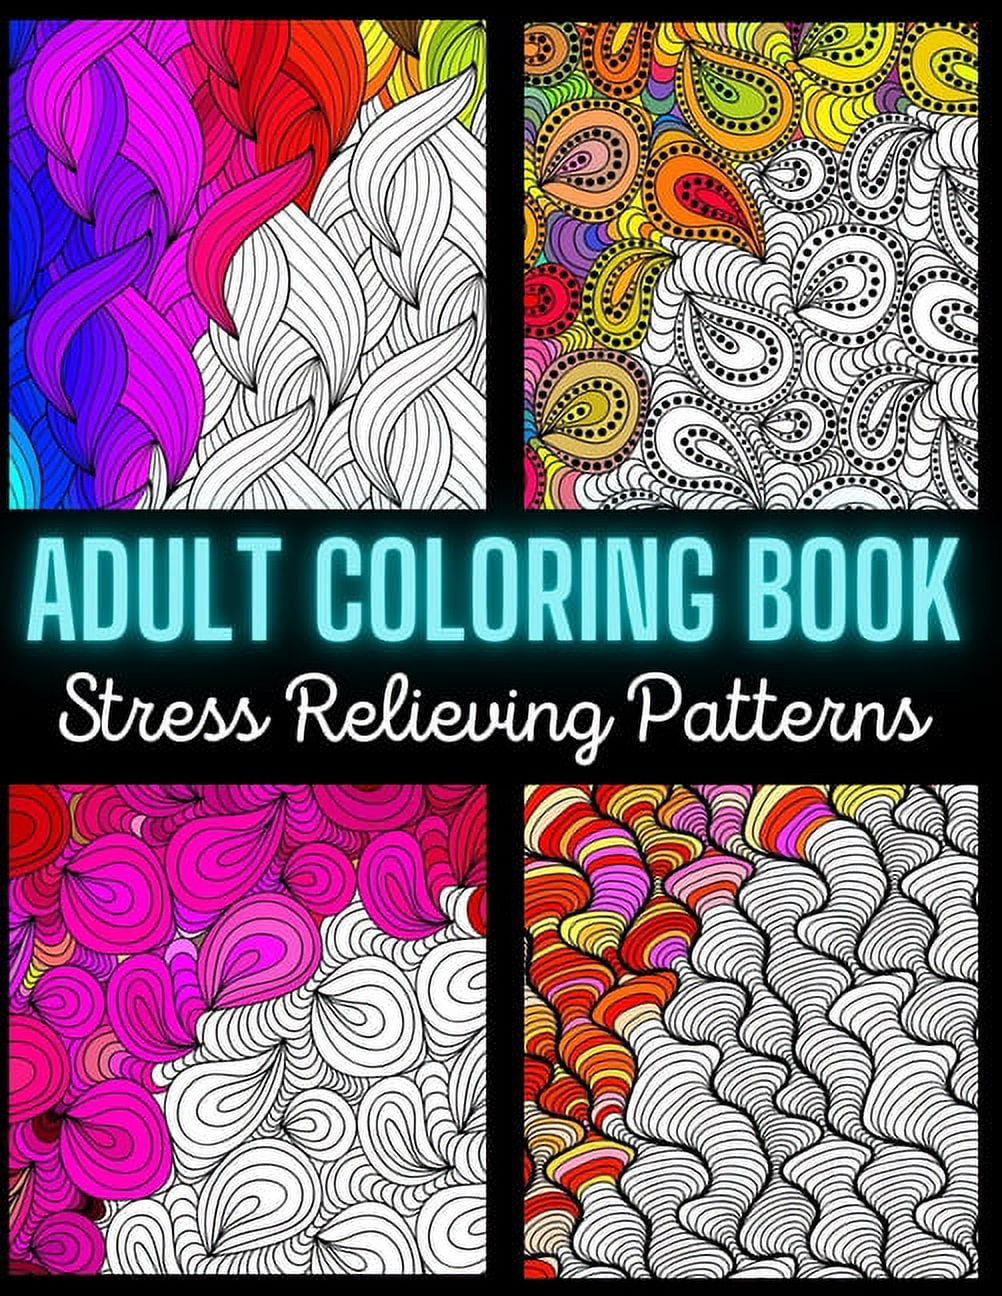 Calming Coloring Books For Adults: 48 Stress Relieving Pattern Designs size  8*11 - A Lot of Relaxing and Beautiful Design for Adults. Gift for Mom